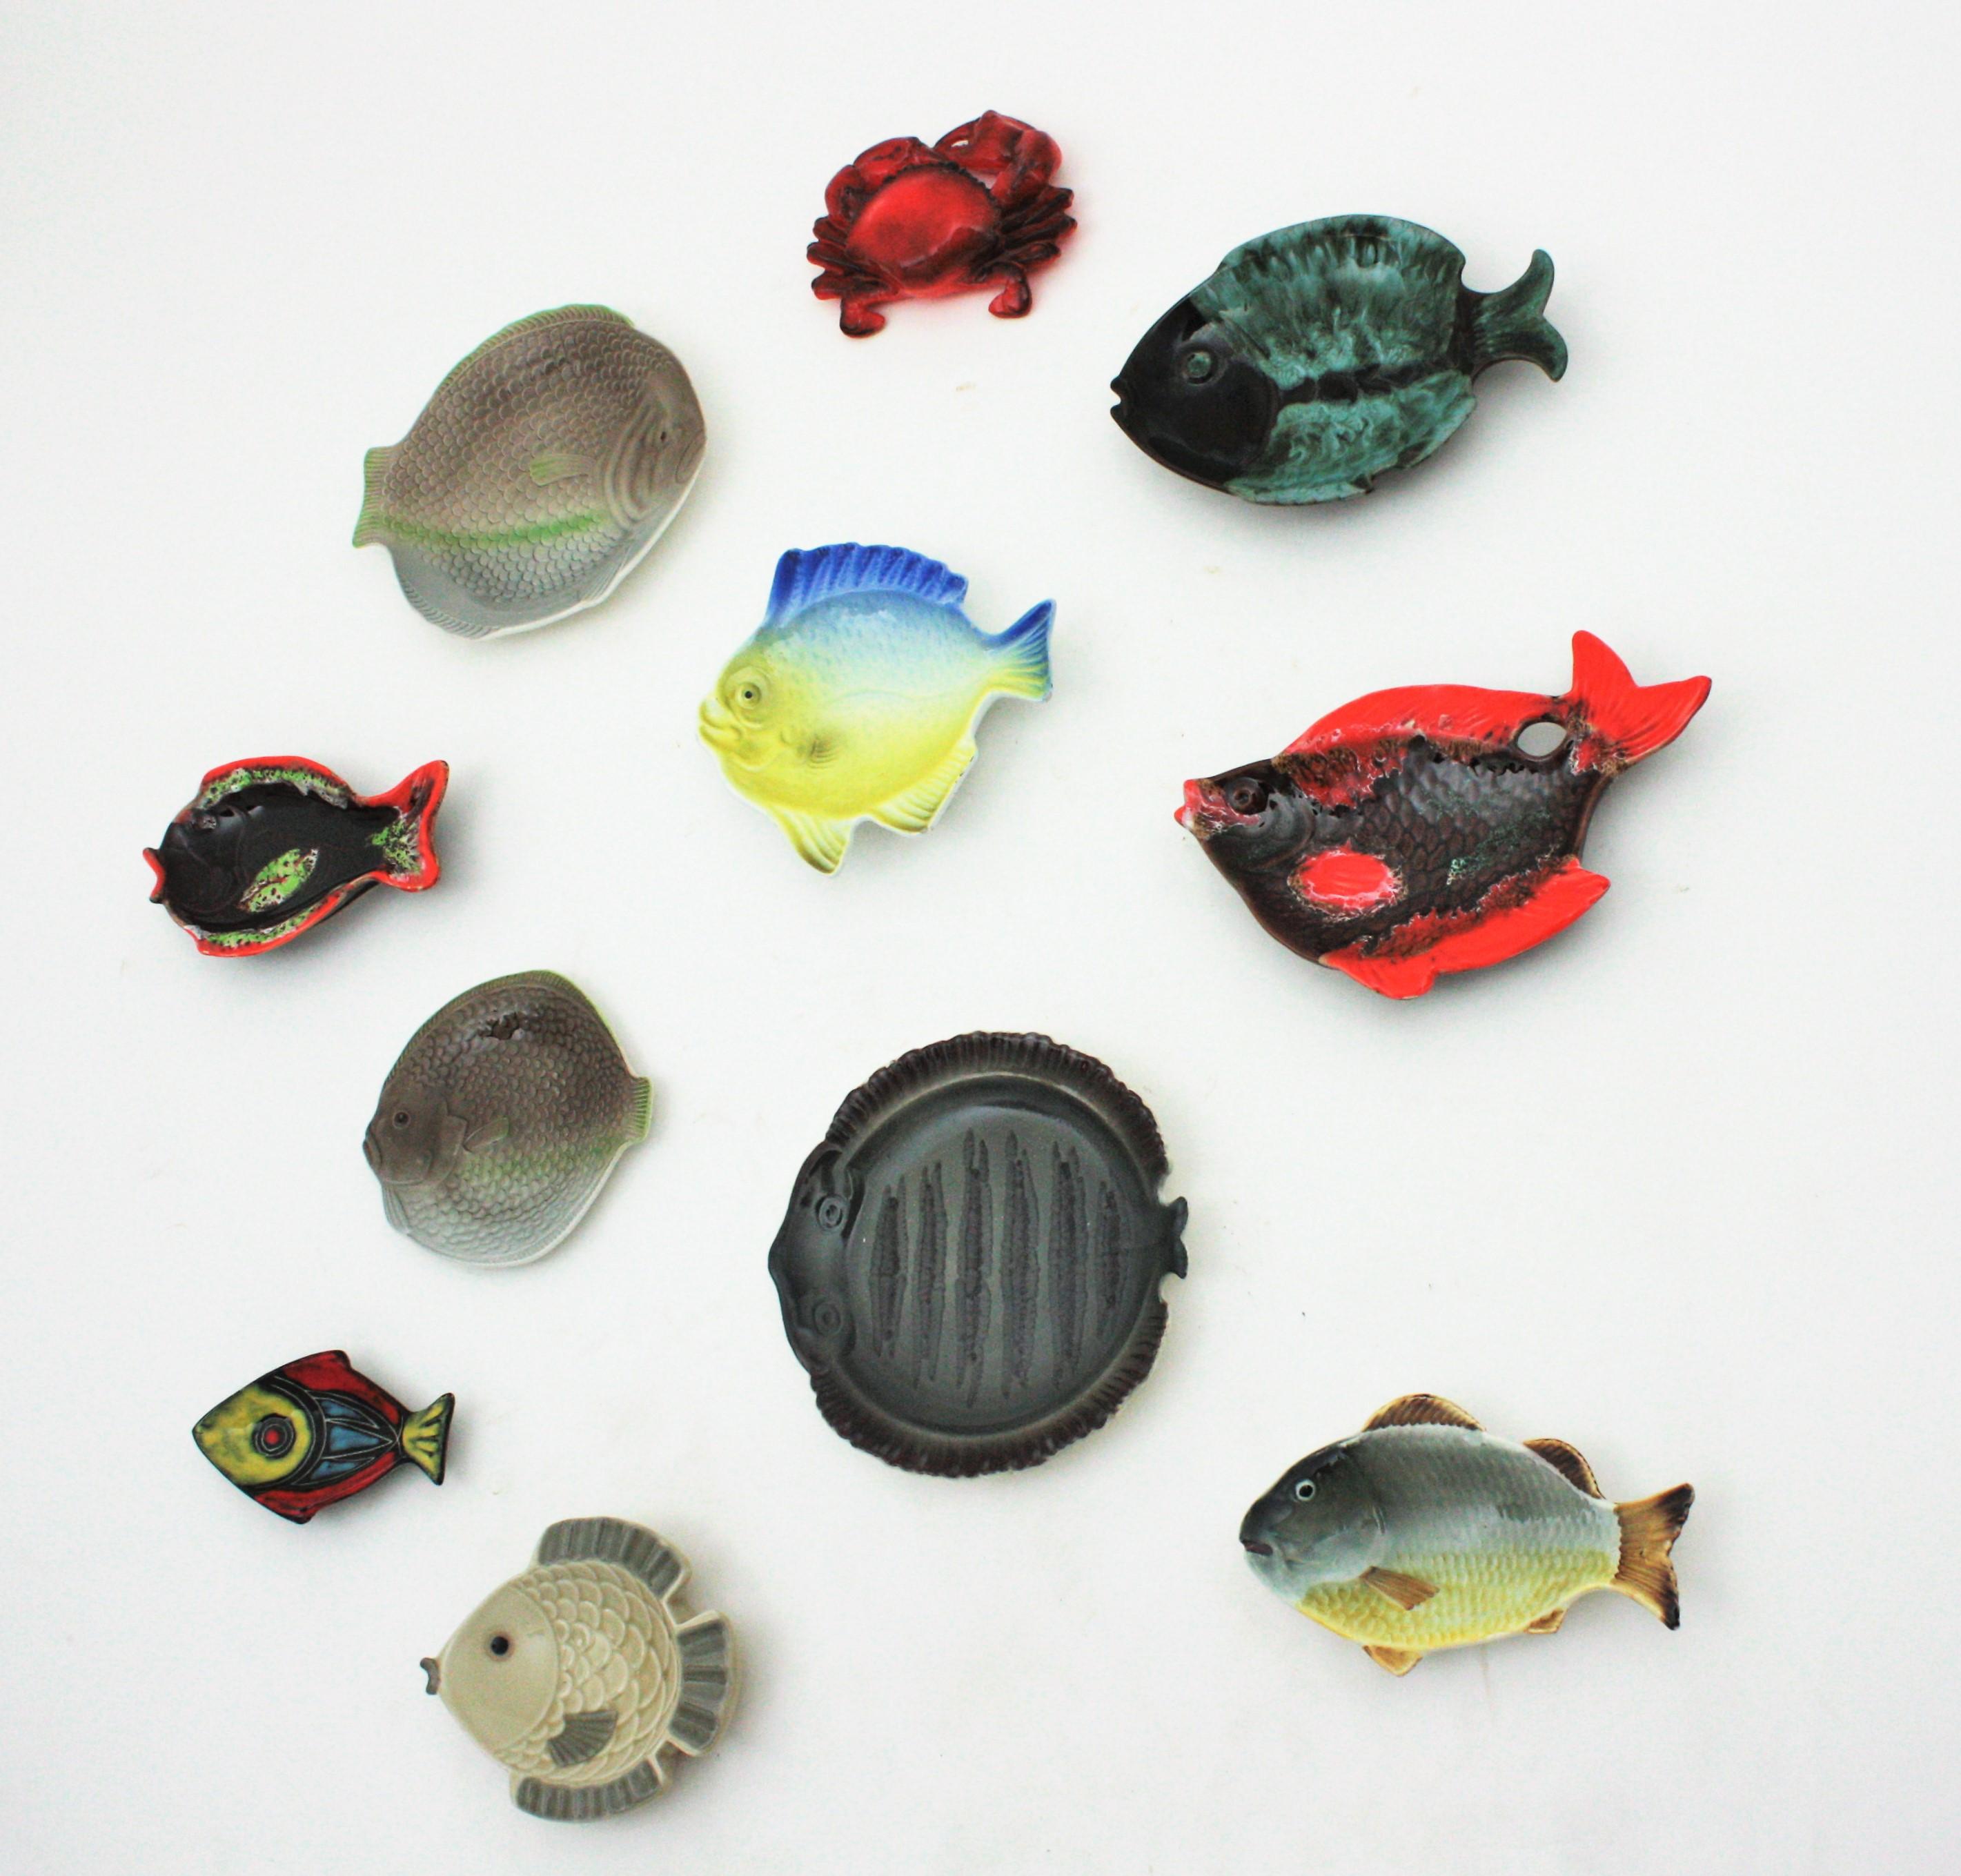 Set of midcentury multi color ceramic fish Plates and Platters as Wall Decoration
A cool collection of eleven european glazed ceramic, porcelain and terracotta fishes in different shapes and sizes.
They come from France, Portugal, England, Canada